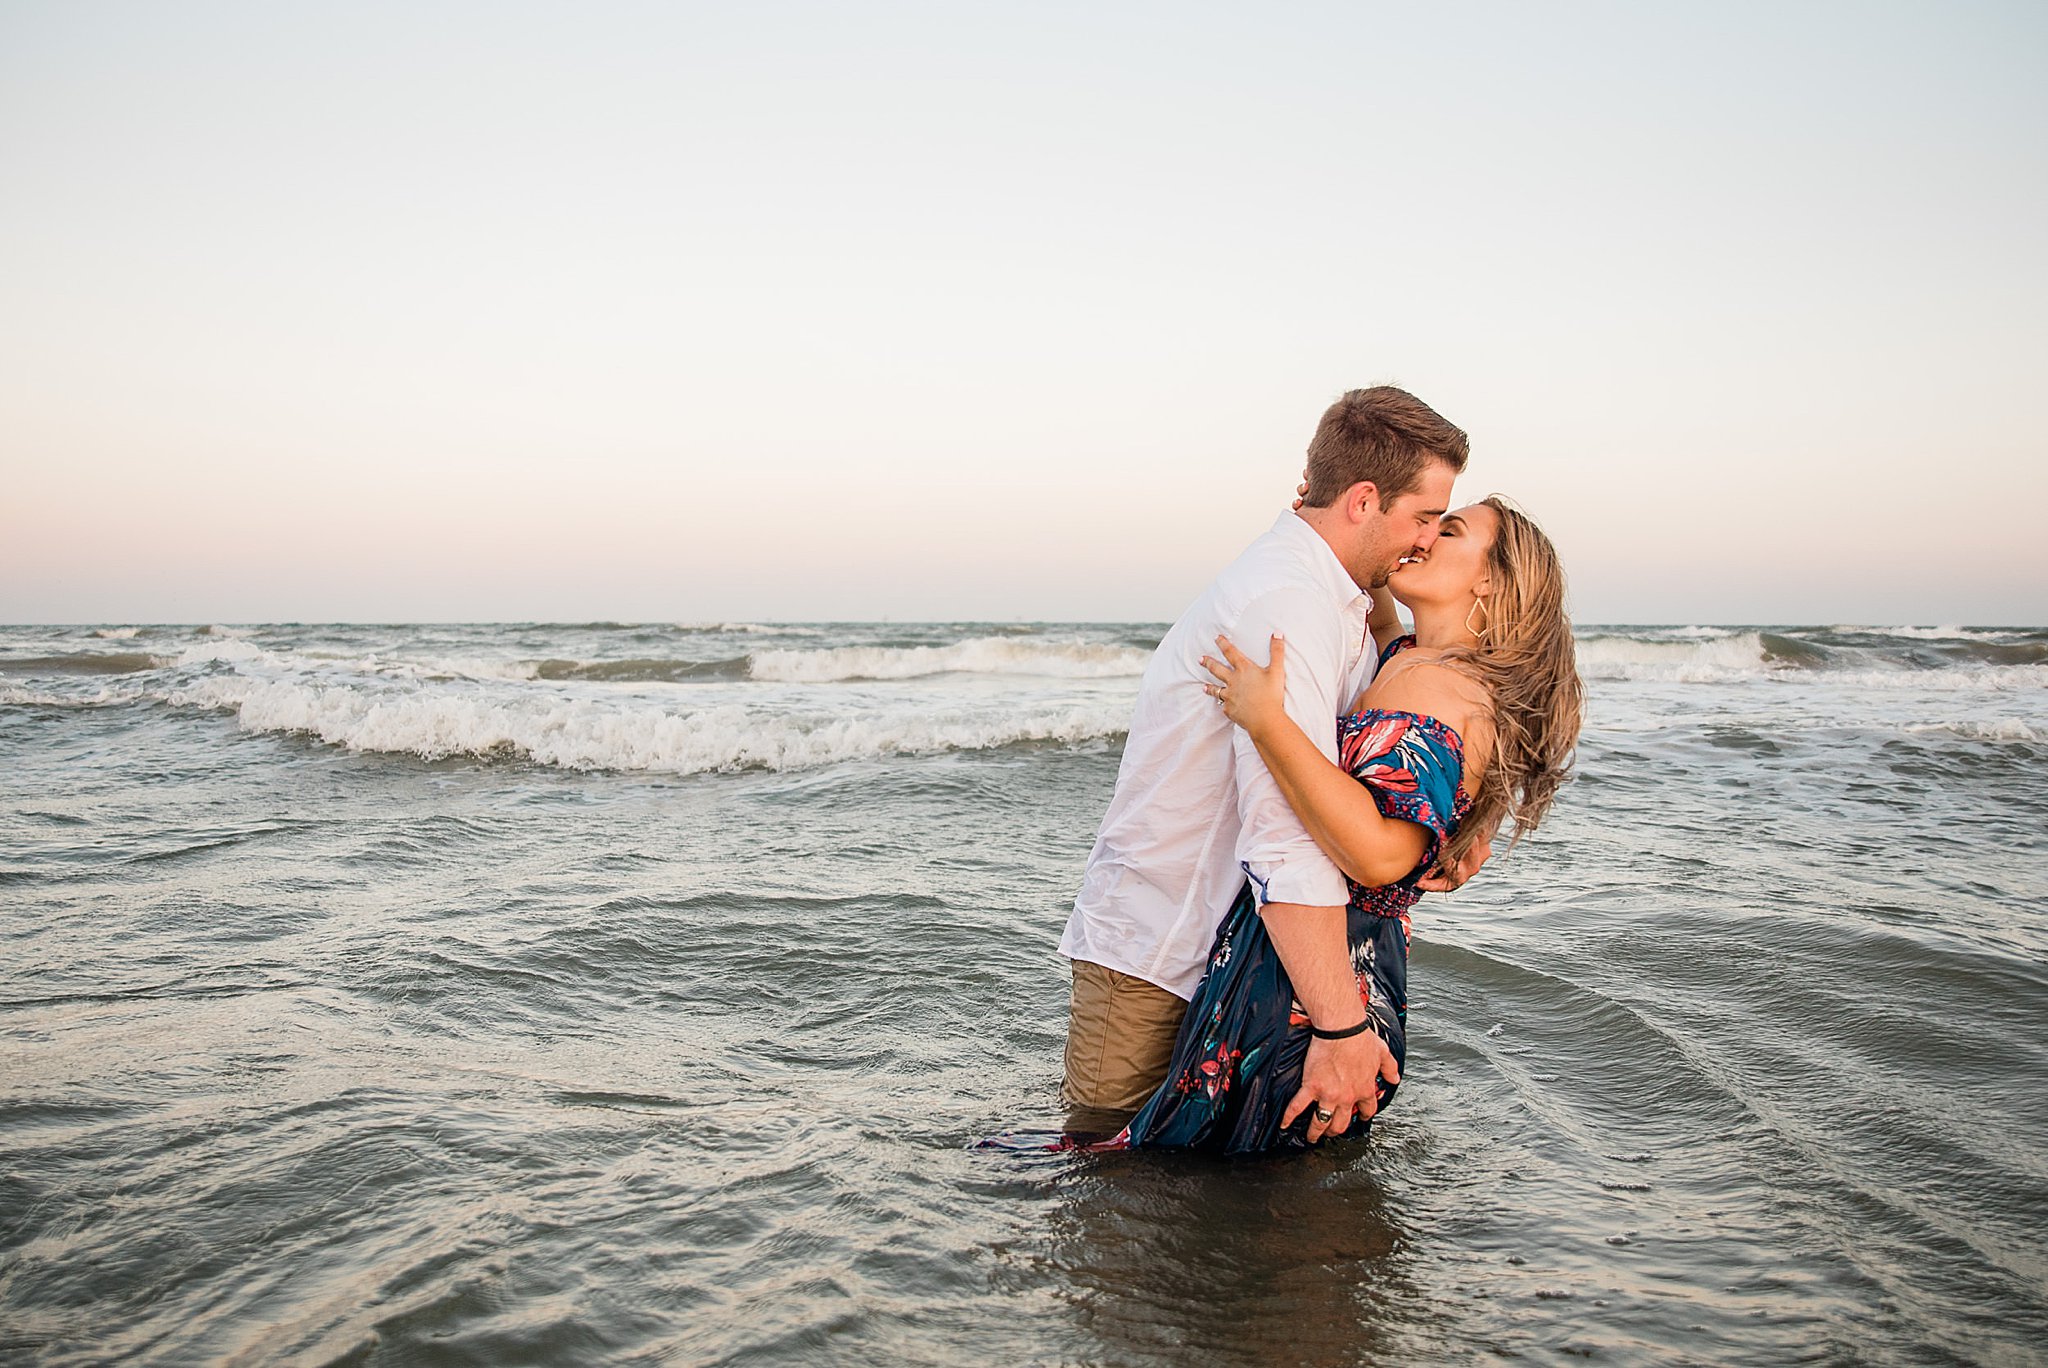 Man in white shirt kissing and embracing woman in blue floral dress waist deep in the ocean during north padre island engagement.